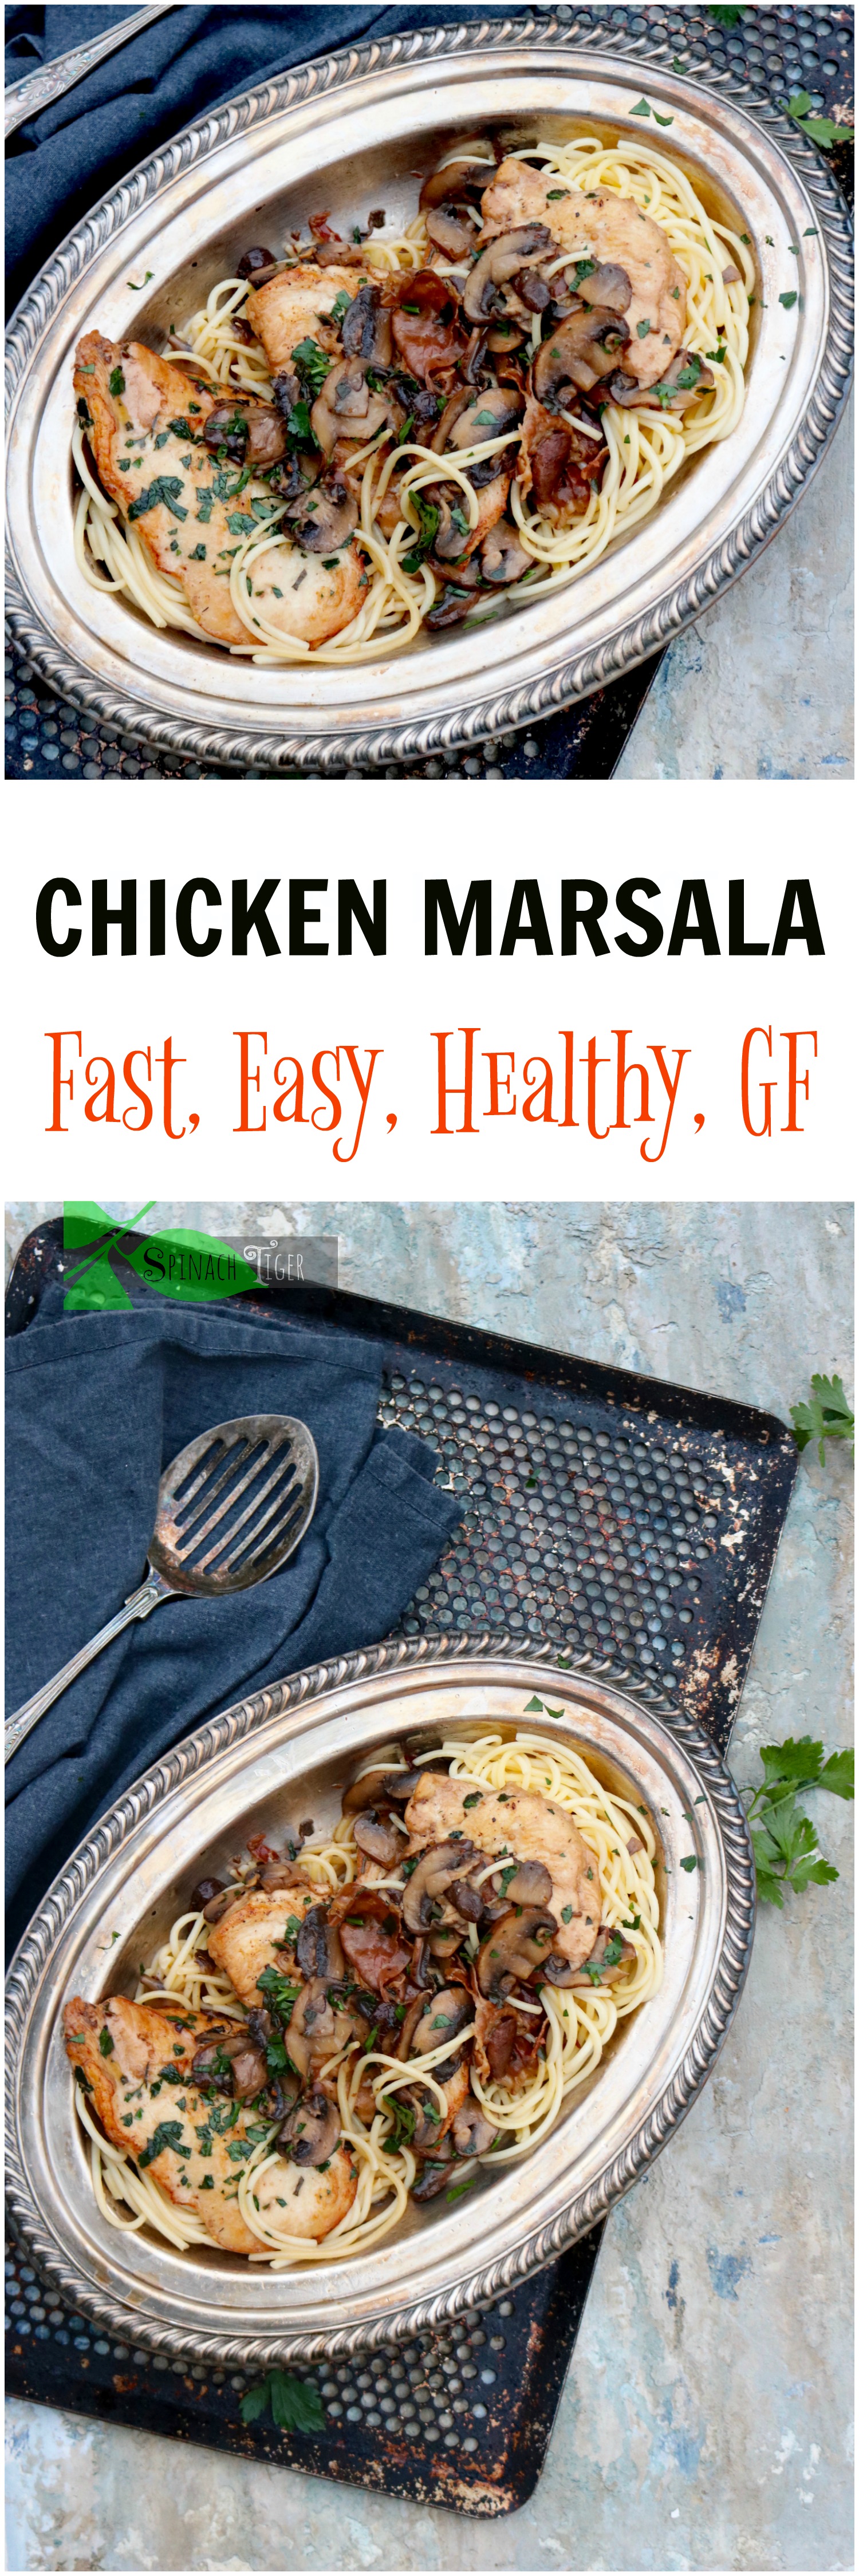 easy chicken marsala with mushrooms recipes from spinach tiger